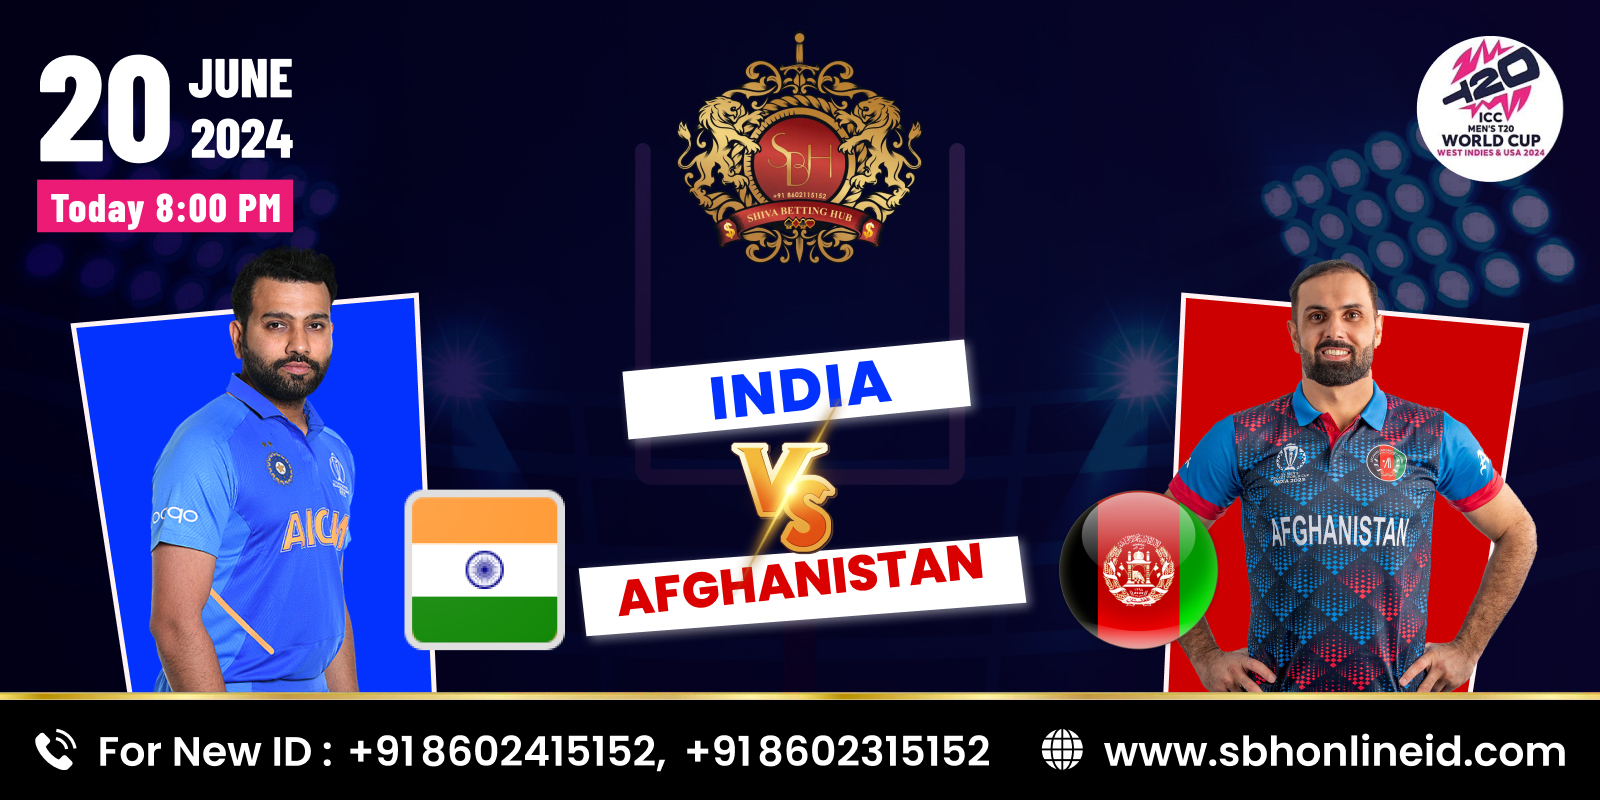 Afghanistan vs India T20 World Cup: Today’s Match Prediction